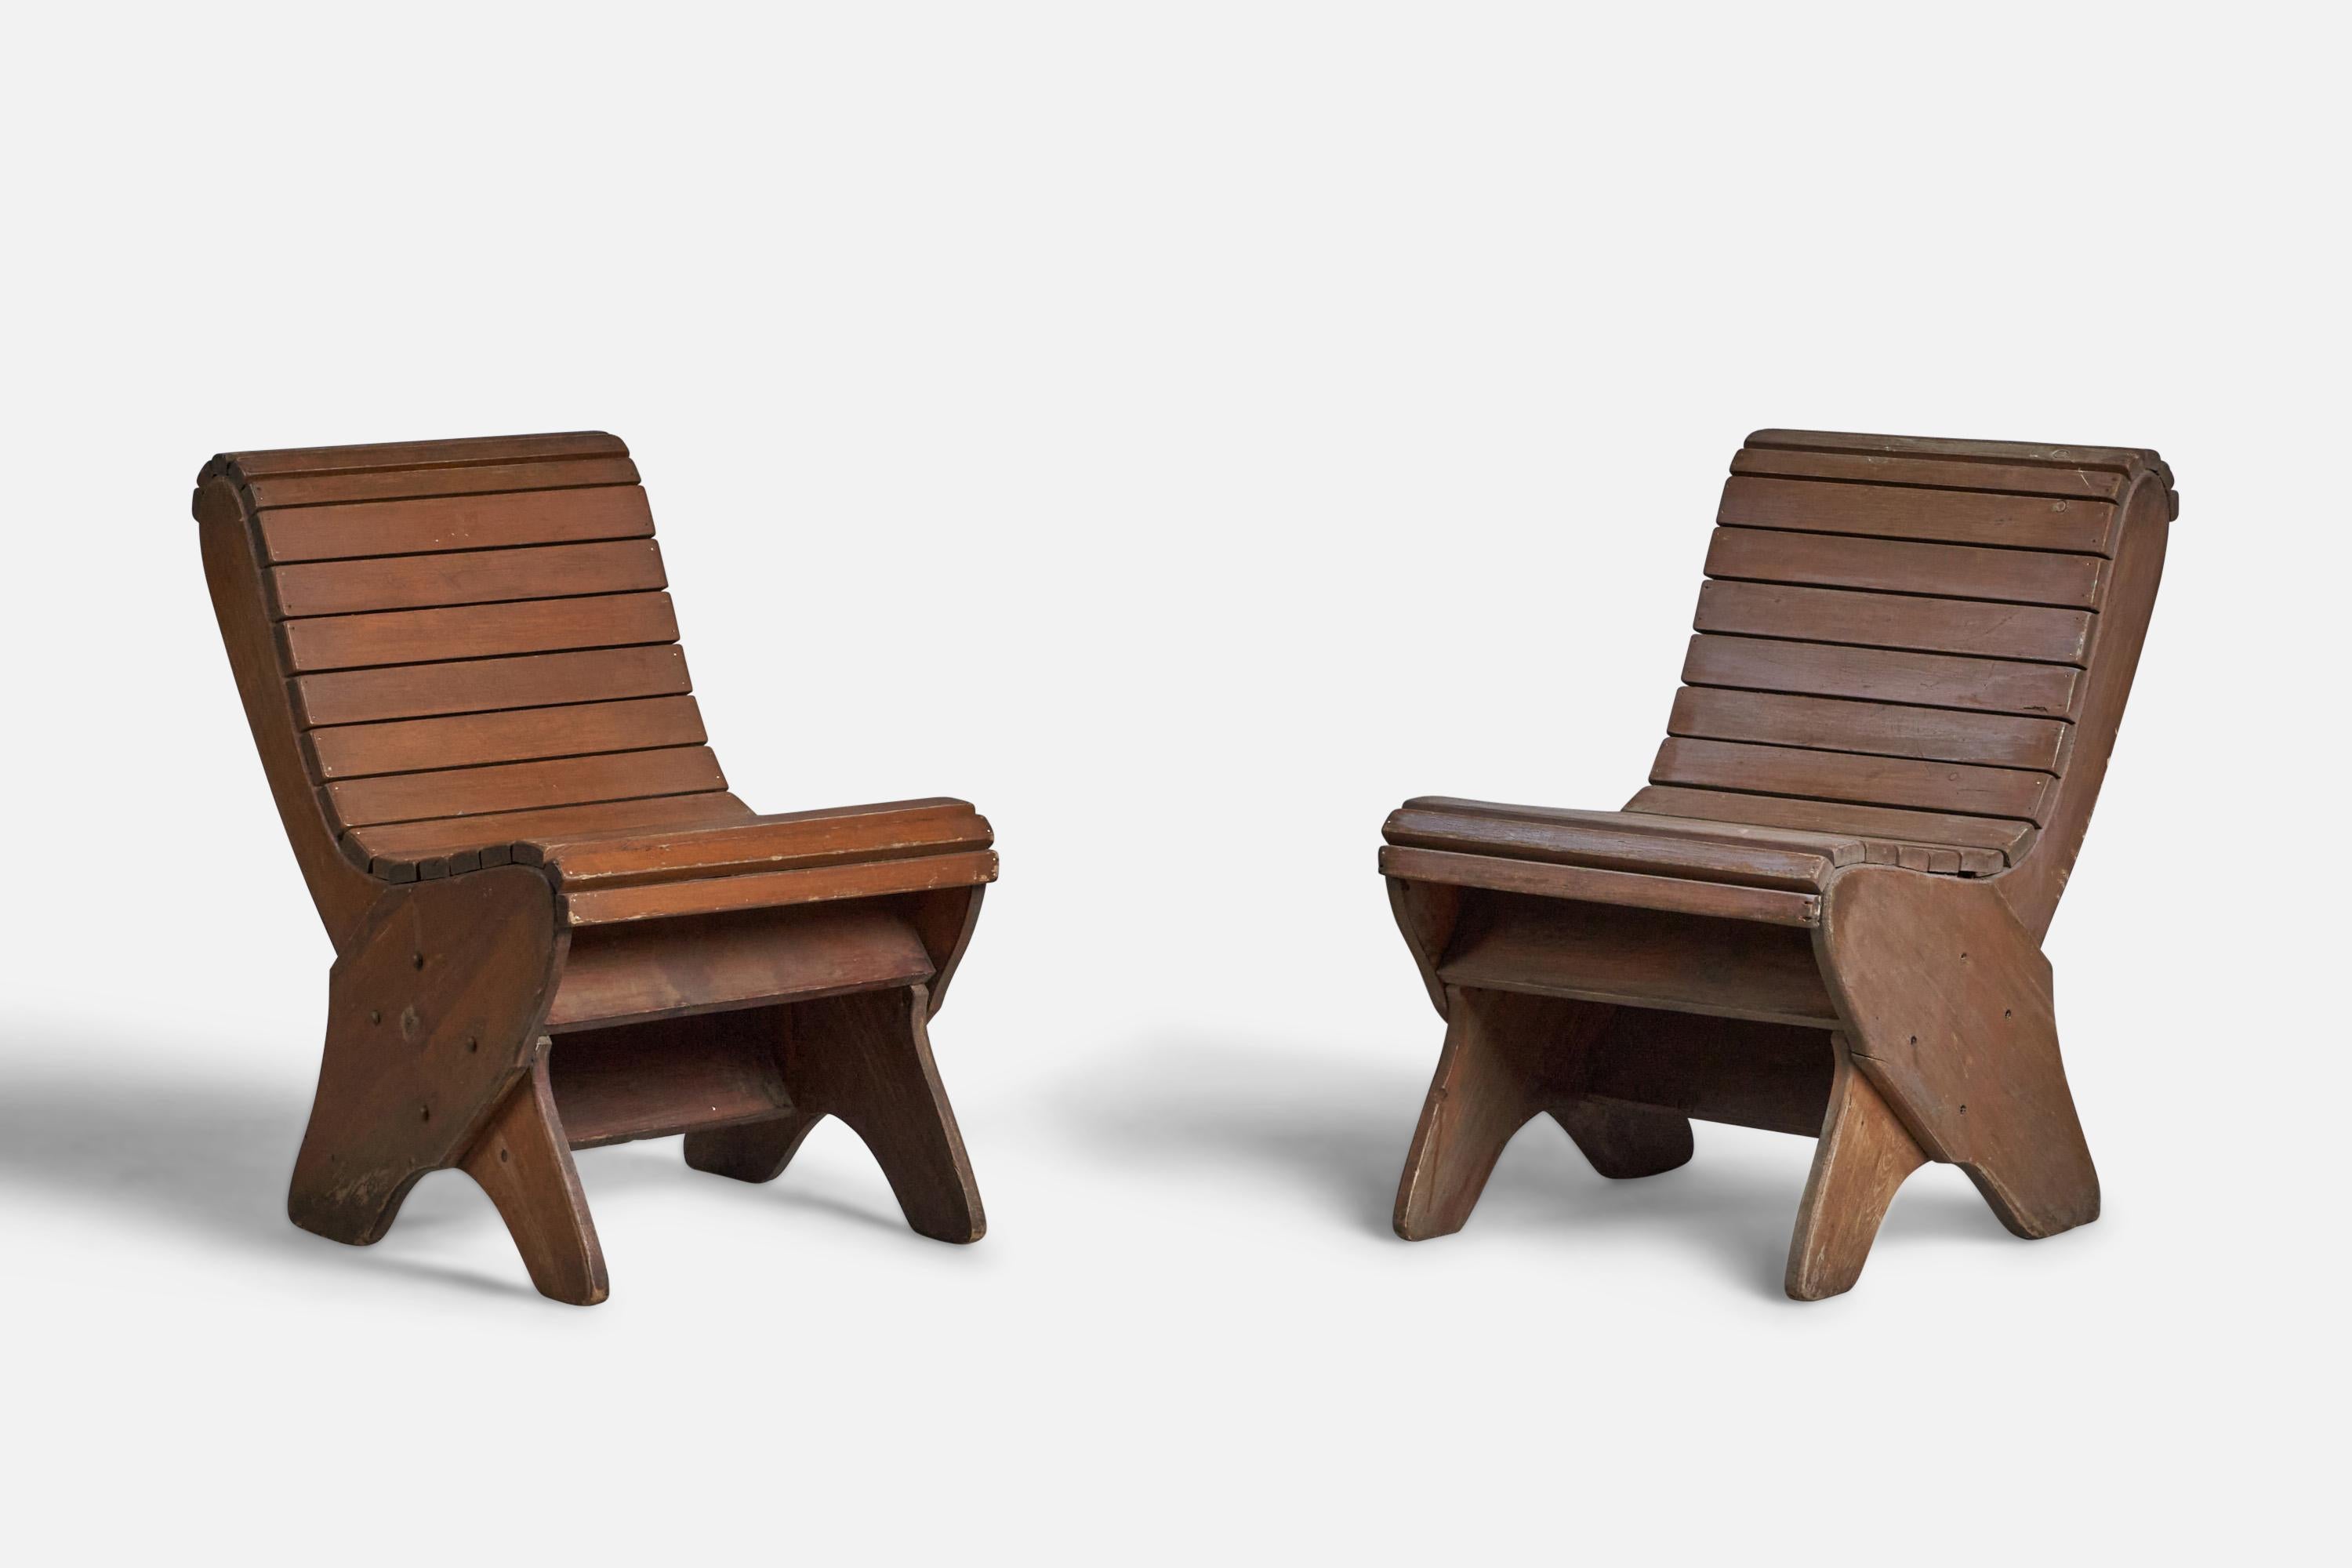 A pair of stained wood side chairs designed and produced in the US, c. 1940s.
16” seat height